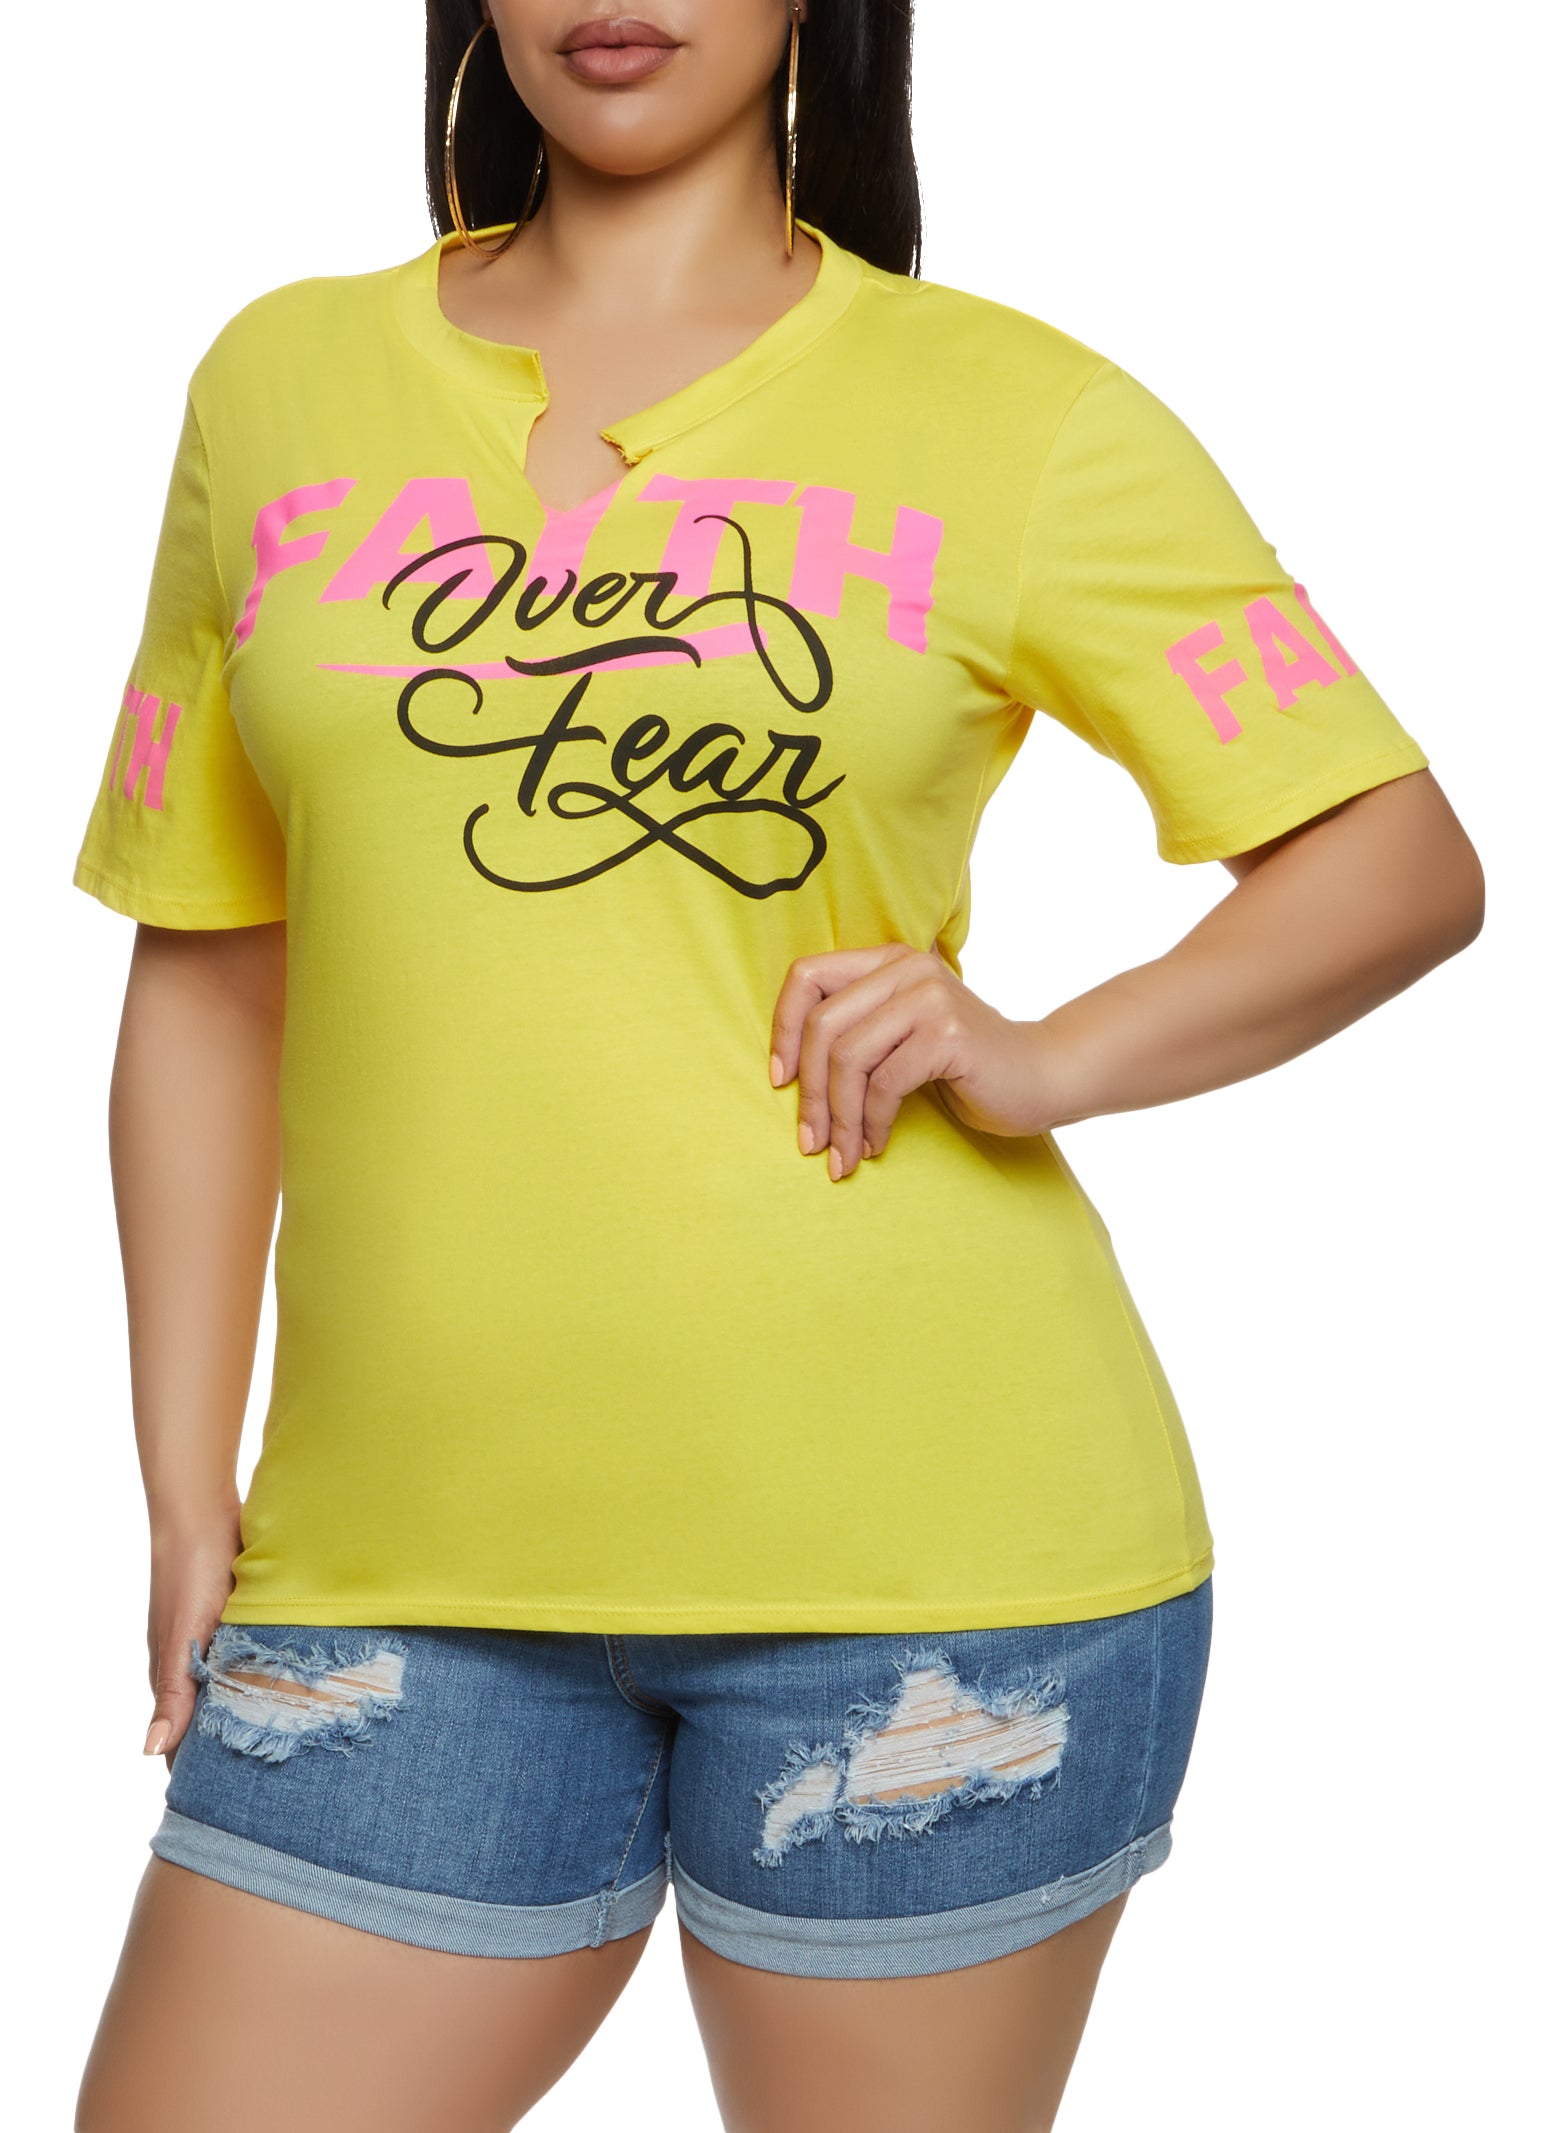 Womens Plus Size Faith Over Fear Graphic Tee, Yellow, Size 1X